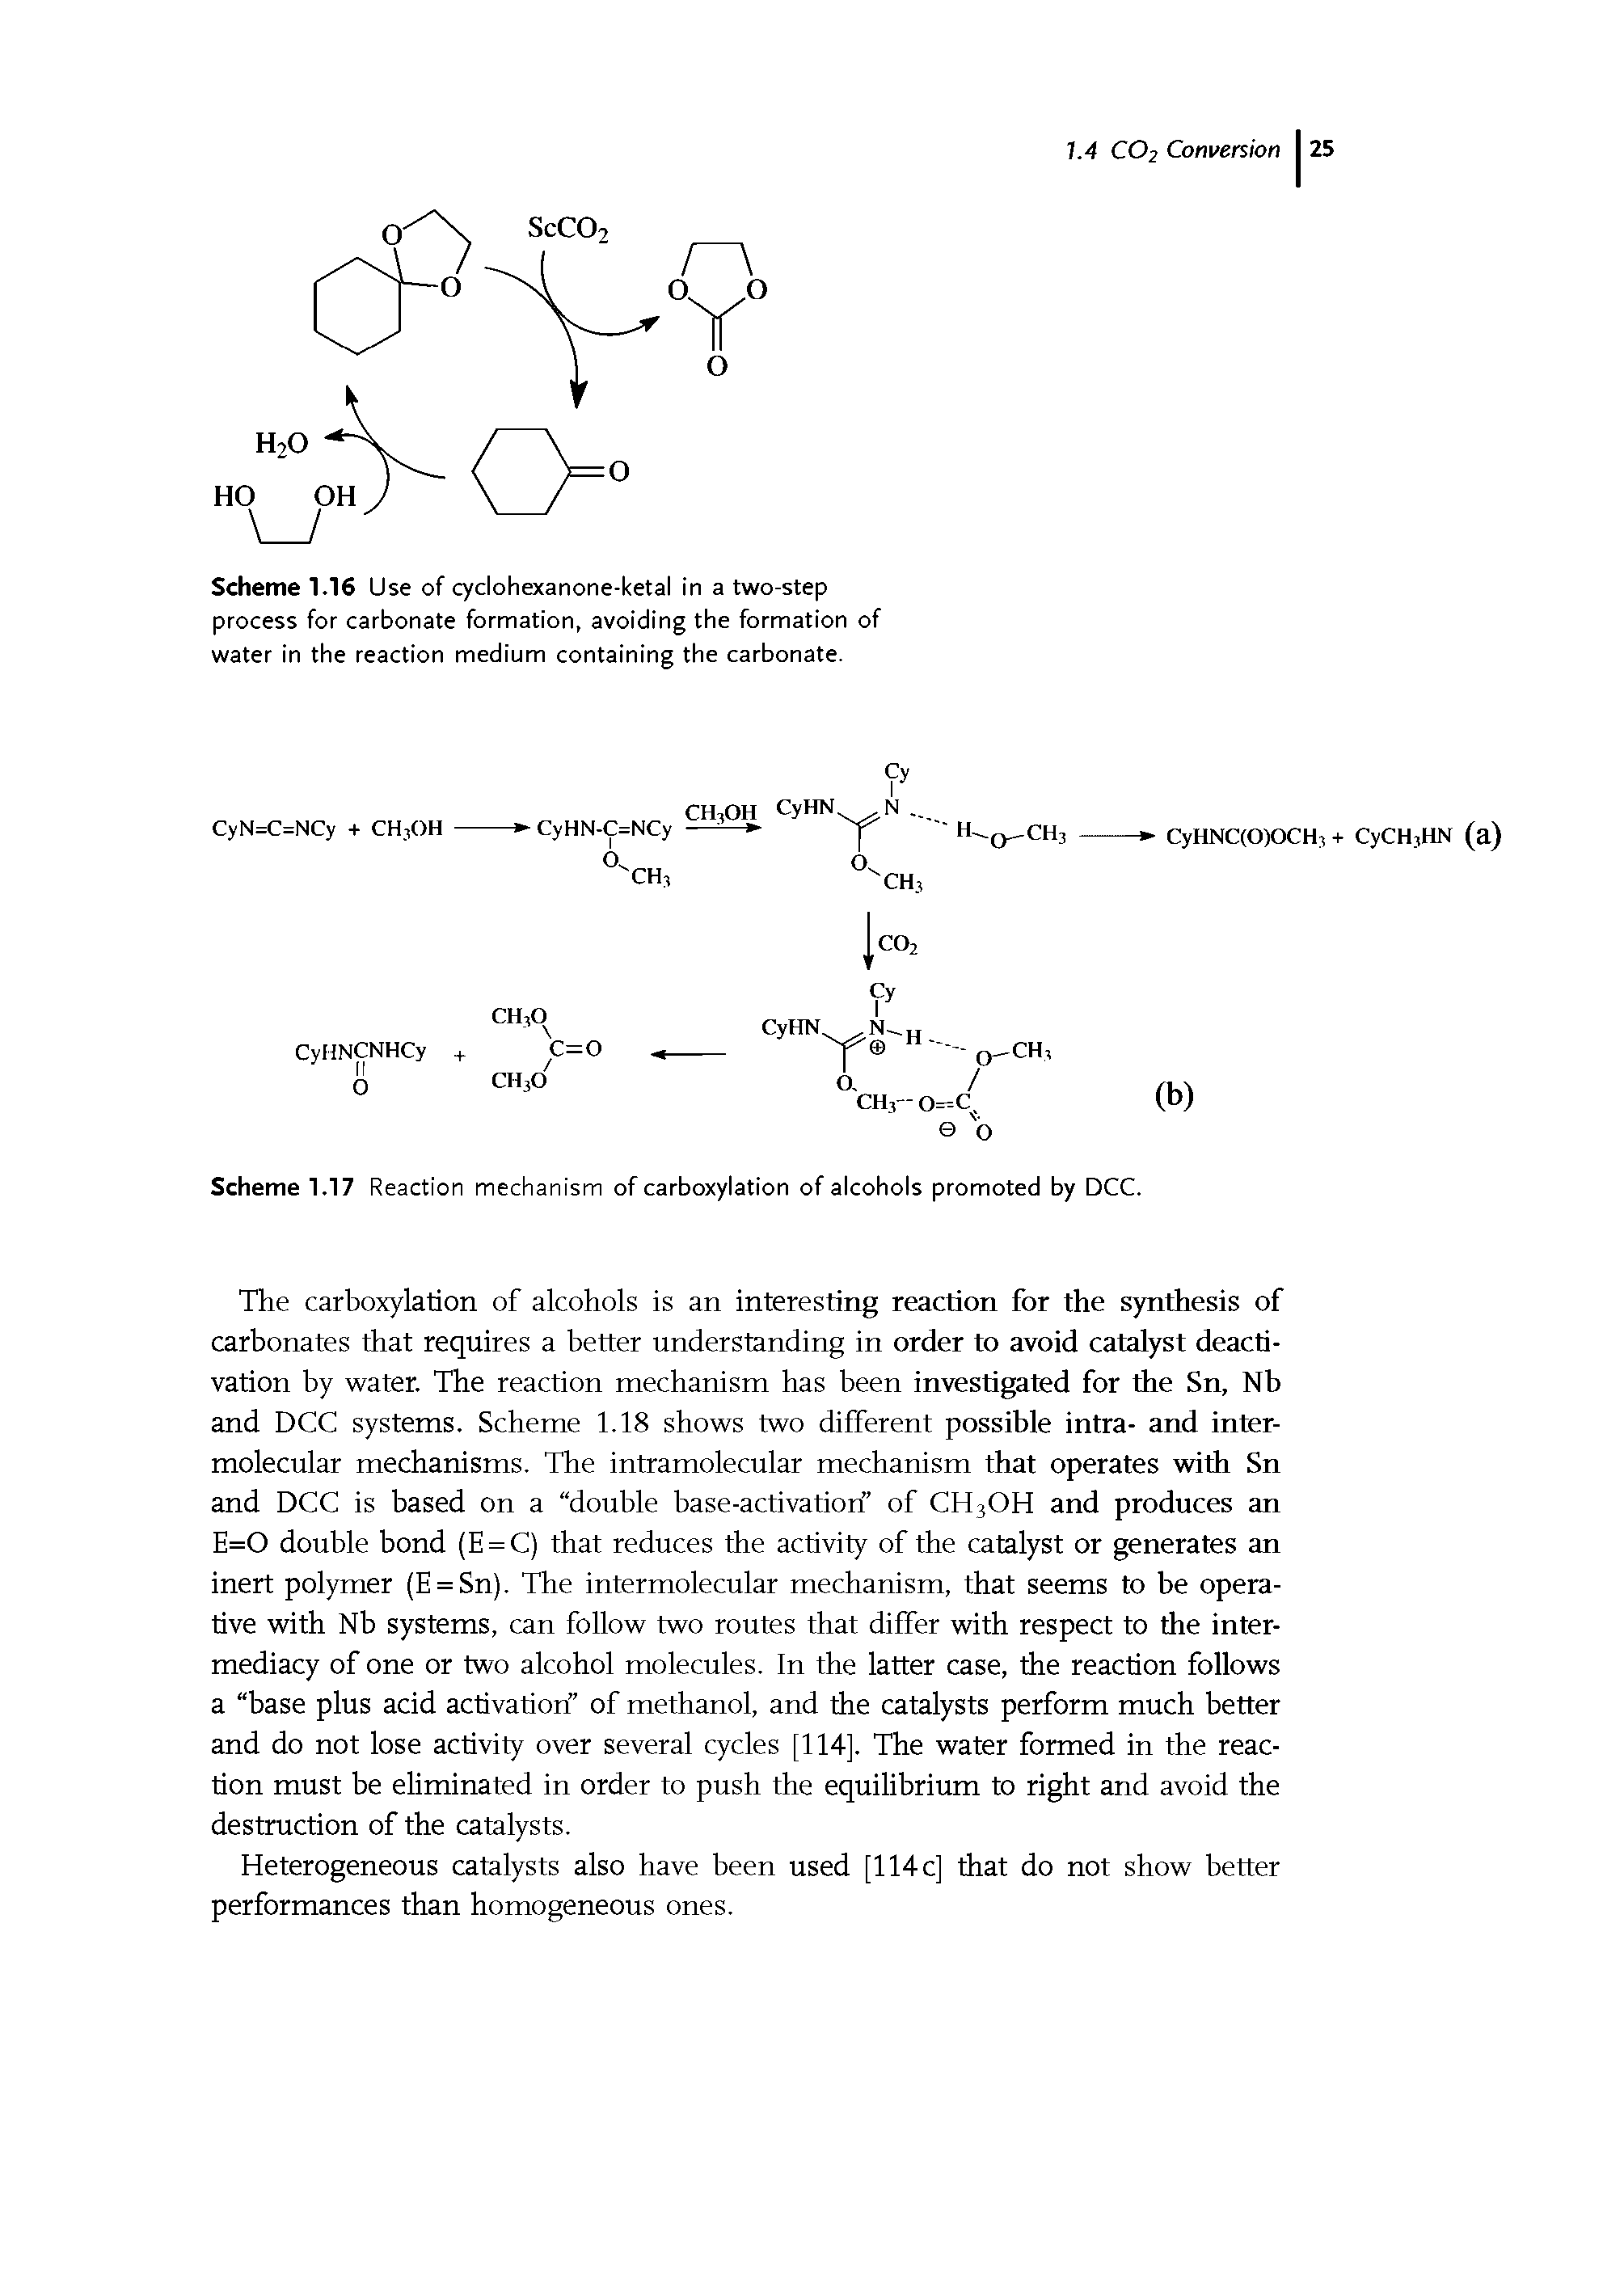 Scheme 1.16 Use of cyclohexanone-ketal in a two-step process for carbonate formation, avoiding the formation of water in the reaction medium containing the carbonate.